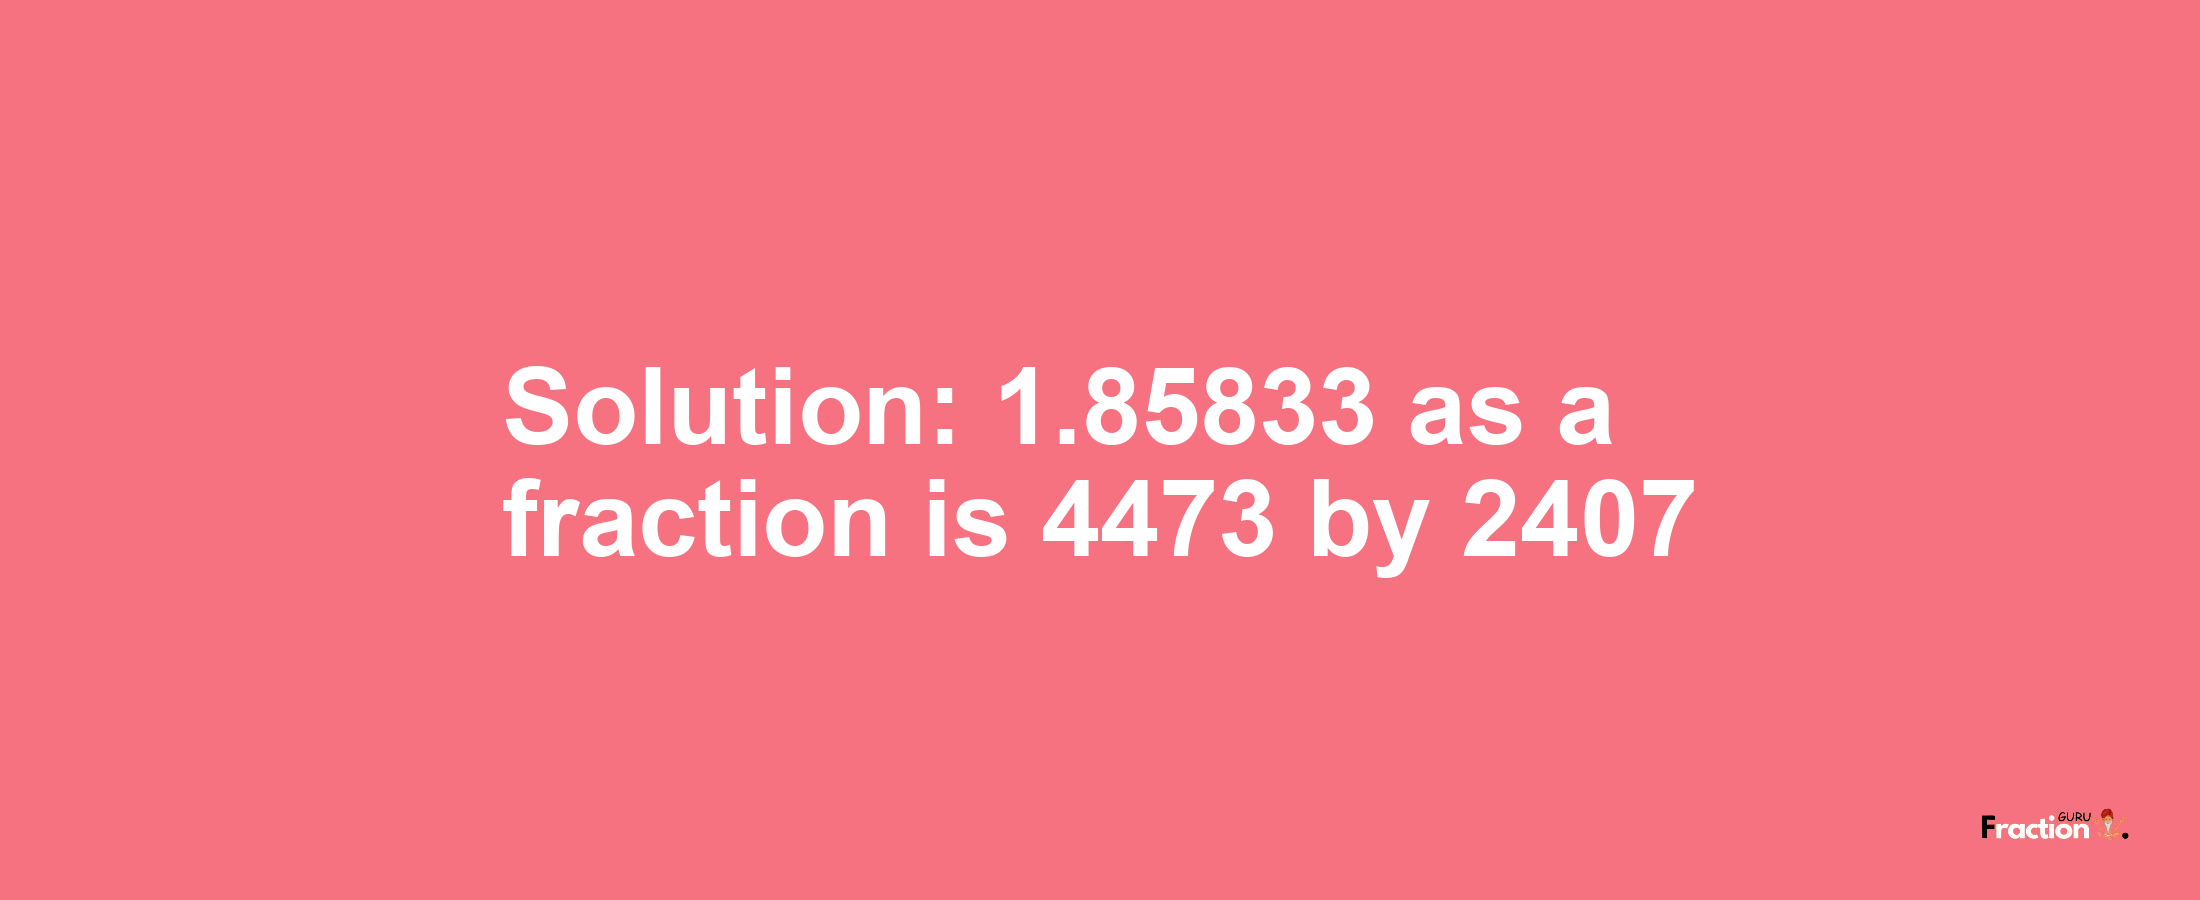 Solution:1.85833 as a fraction is 4473/2407